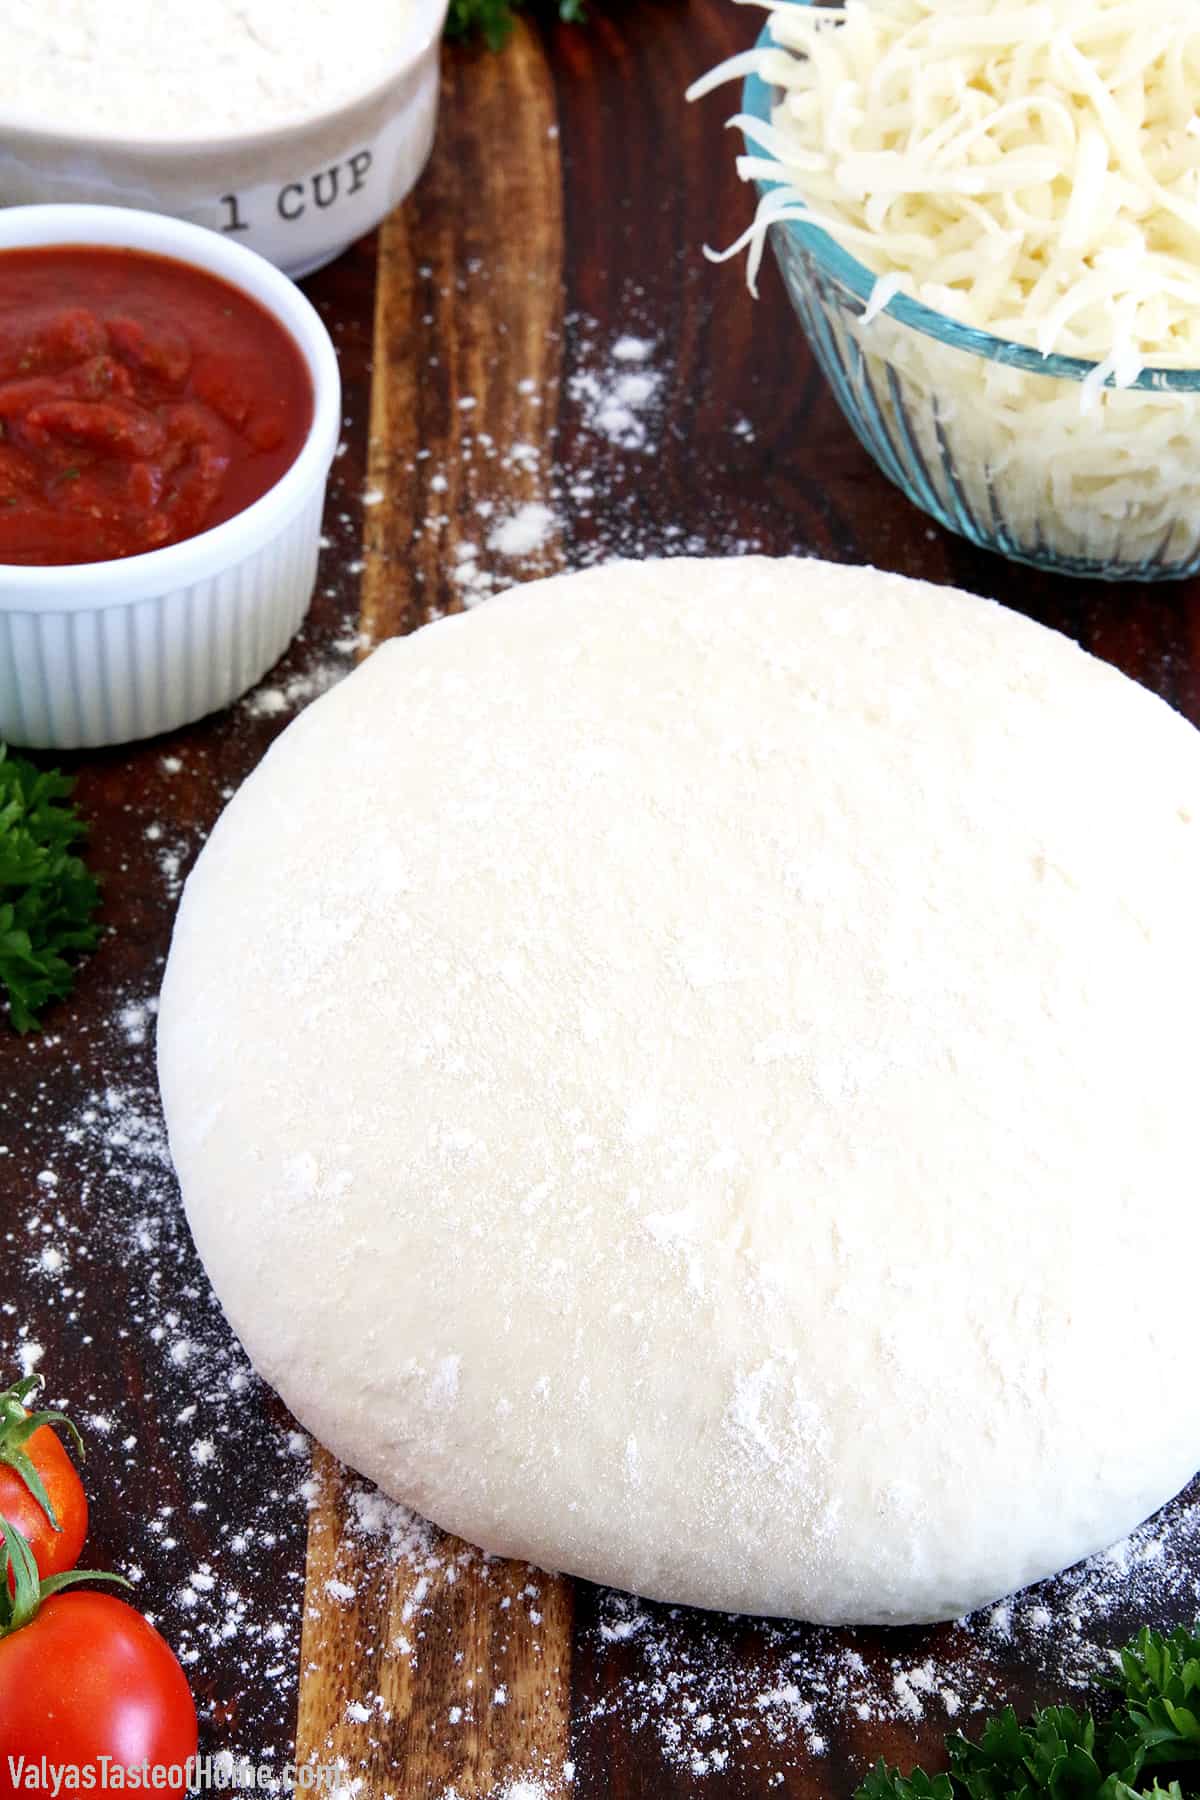 This homemade pizza dough recipe is perfect for beginners. You'll get a soft, fluffy, and chewy dough crust with it every time!